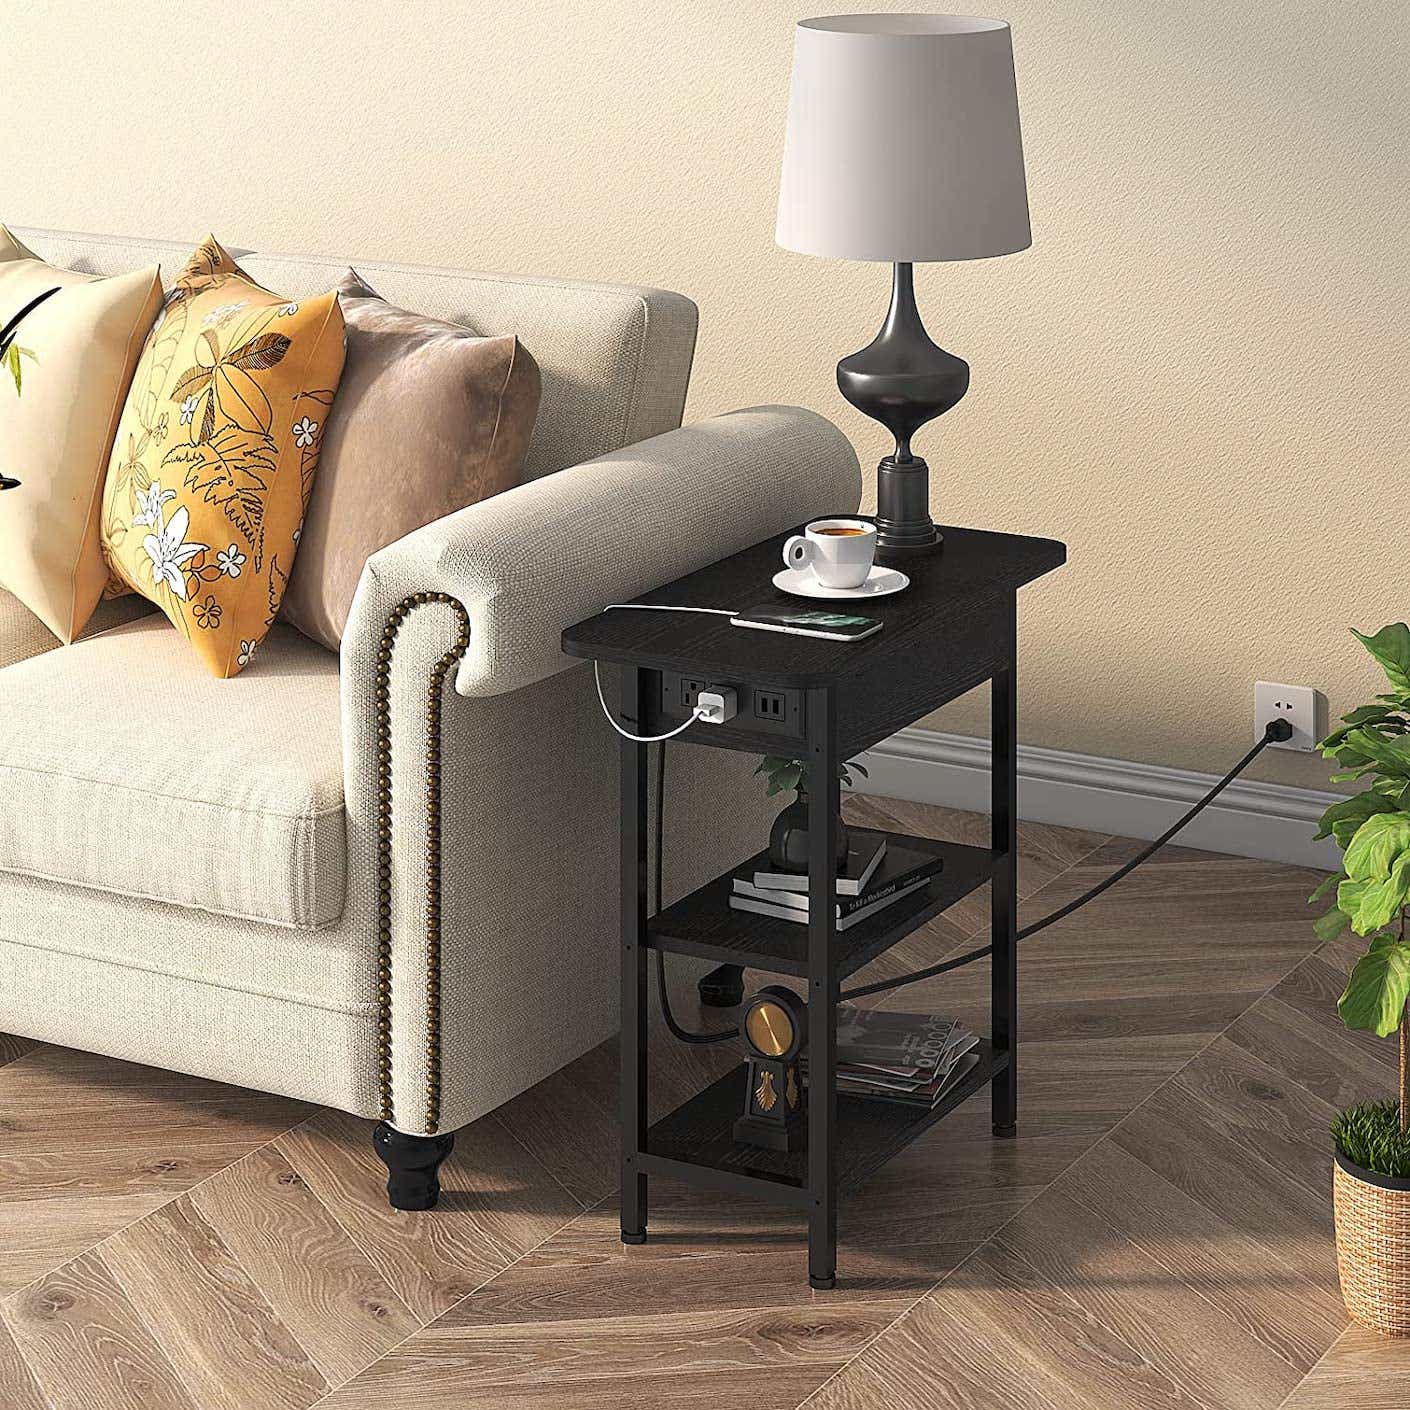 A black end table with charging ports sits next to a plush sofa.